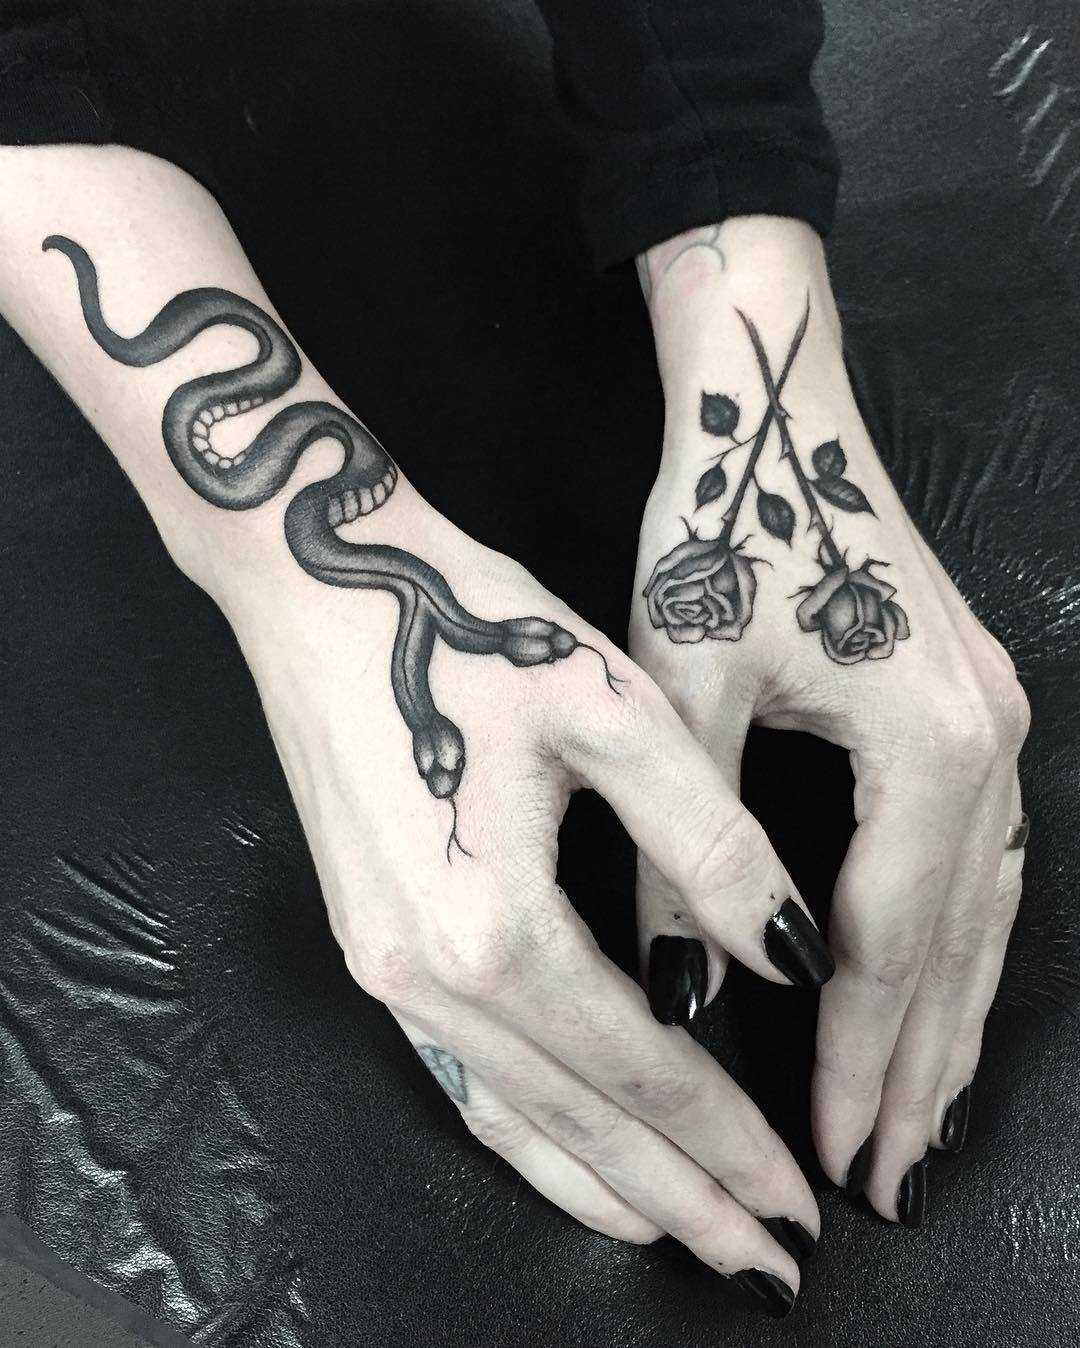 Snake and roses tattoos on hands